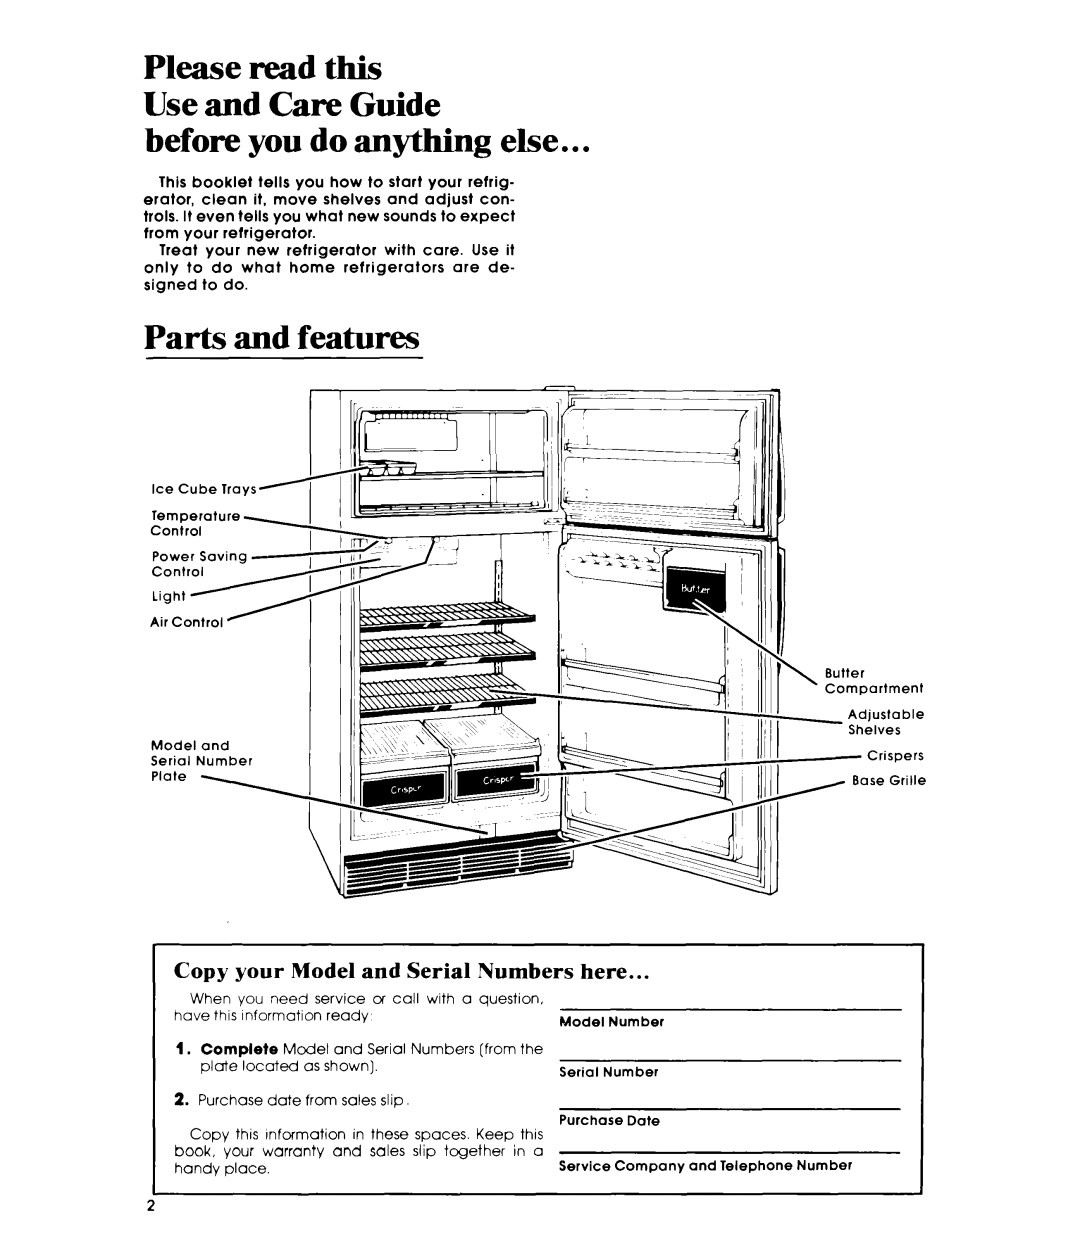 Whirlpool ET19JKXL manual before you do anything else, Parts and features, Copy your Model and Serial Numbers here 